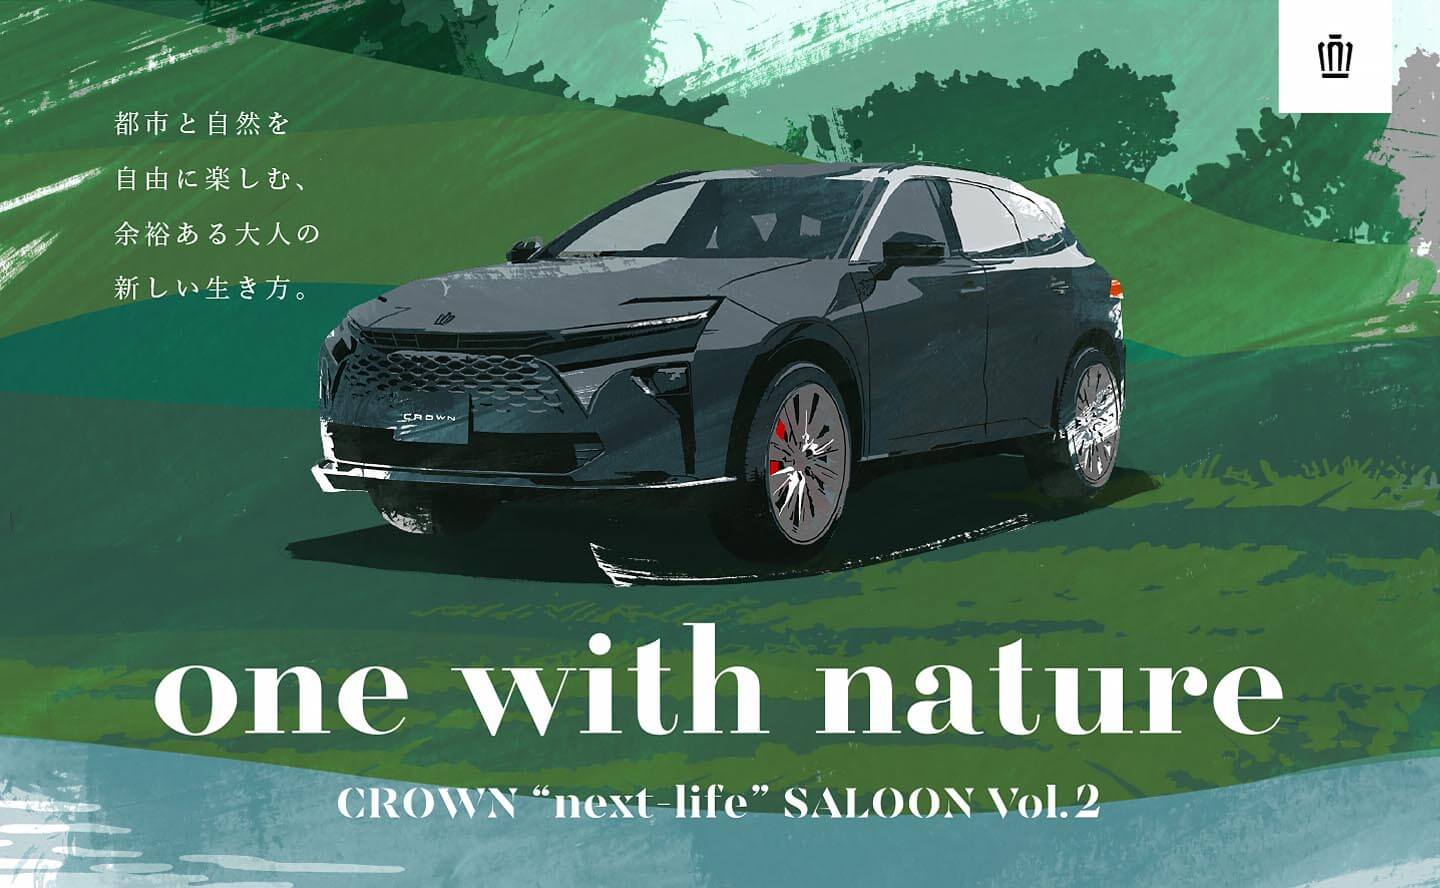 『CROWN “next-life” SALOON -one with nature-』